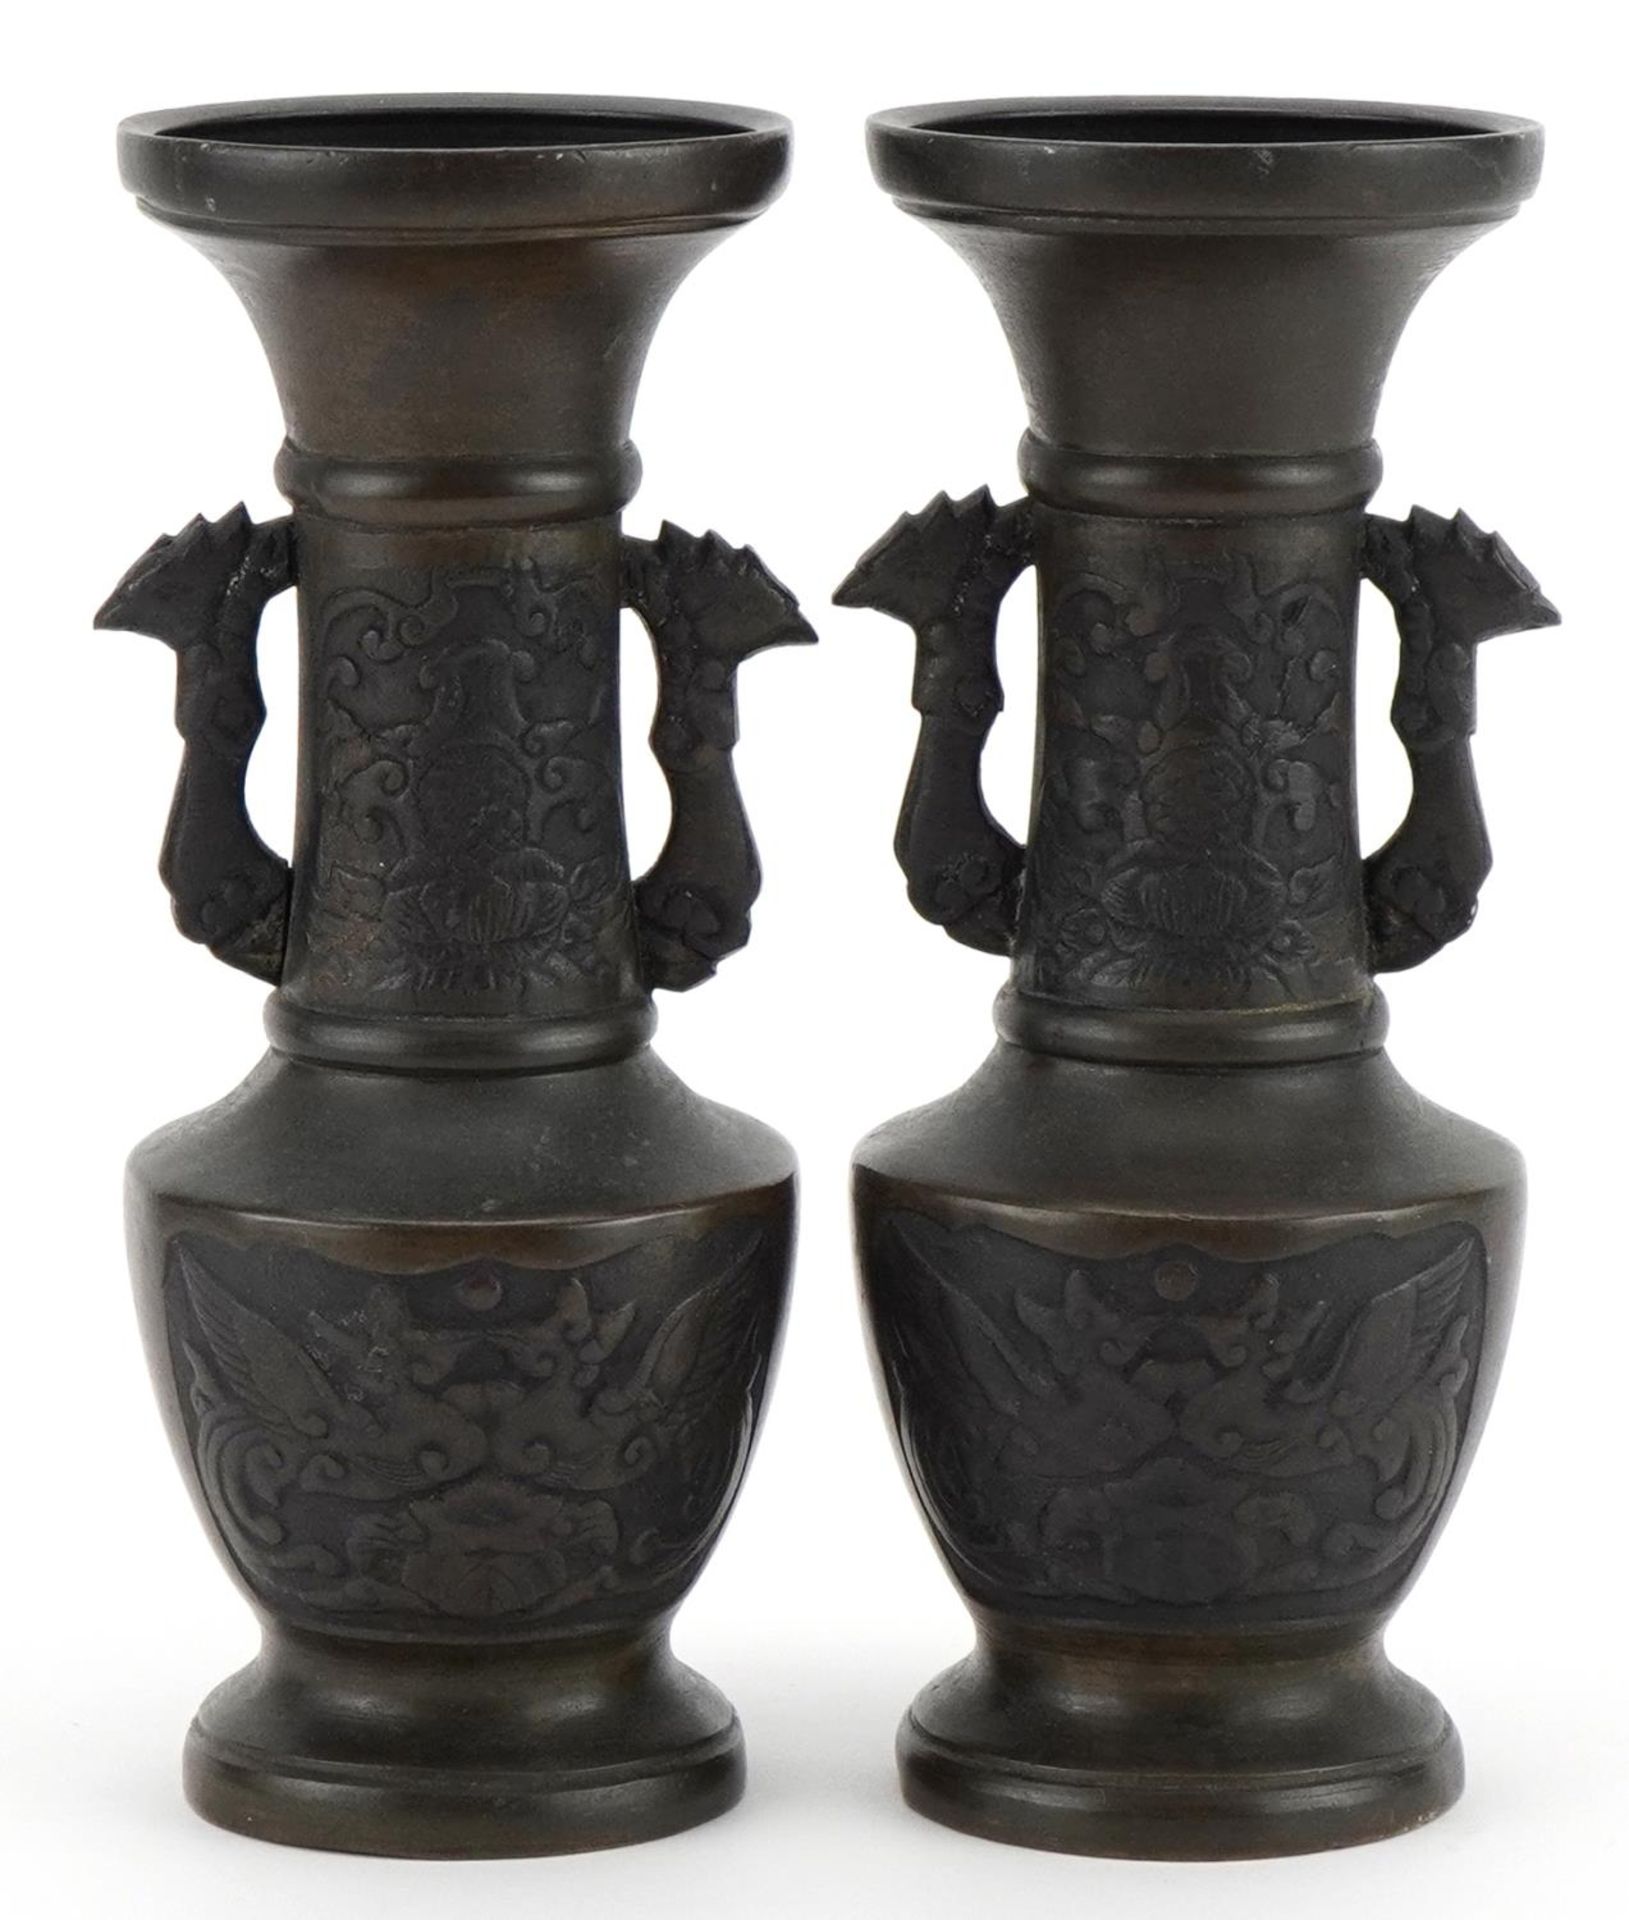 Pair of Japanese patinated bronze vases, each with phoenix handles, 14.5cm high